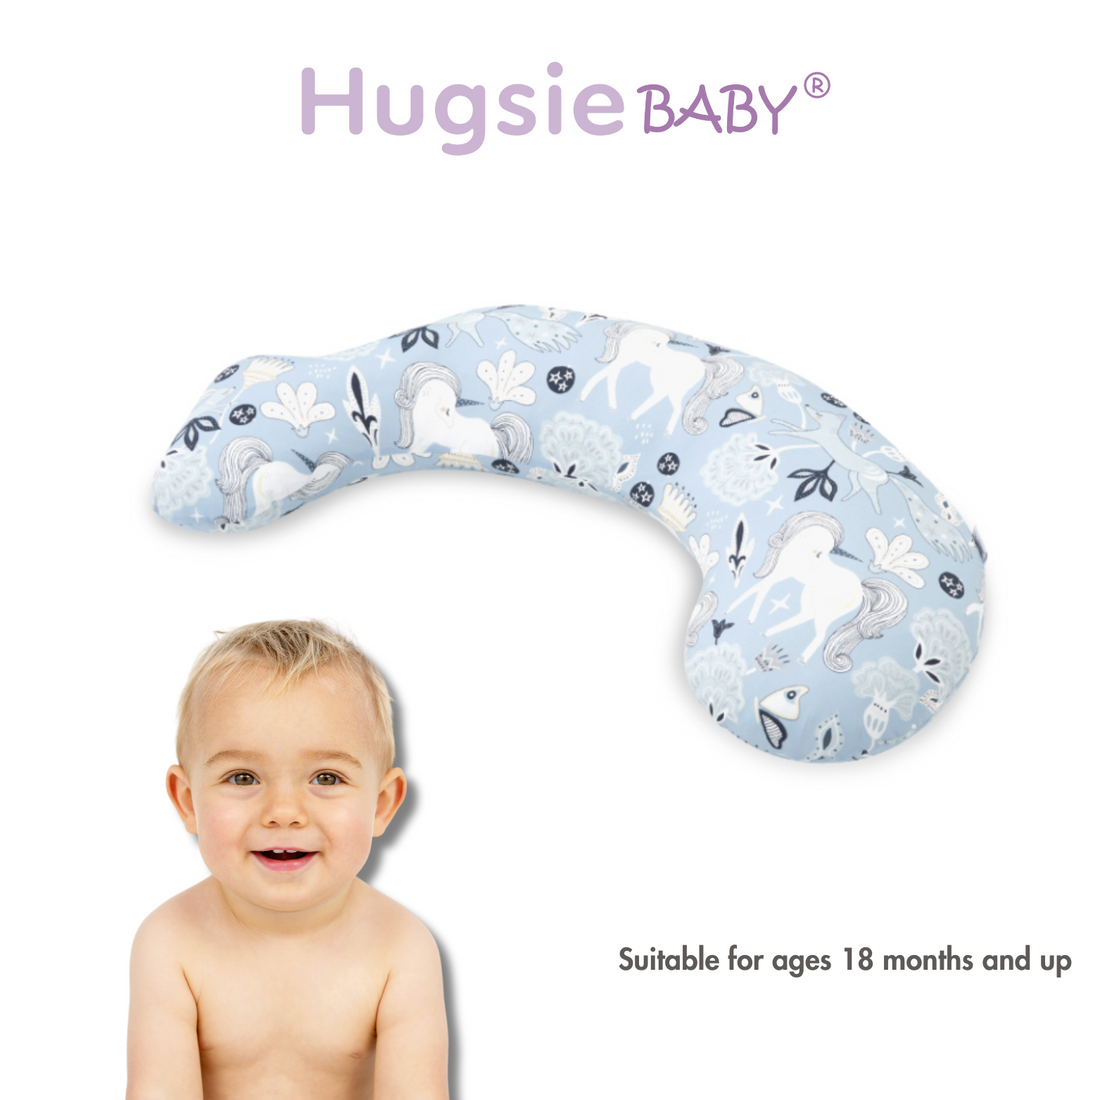 HugsieBaby Aniti-Mites Pillow Cooling Touch -Unicorn